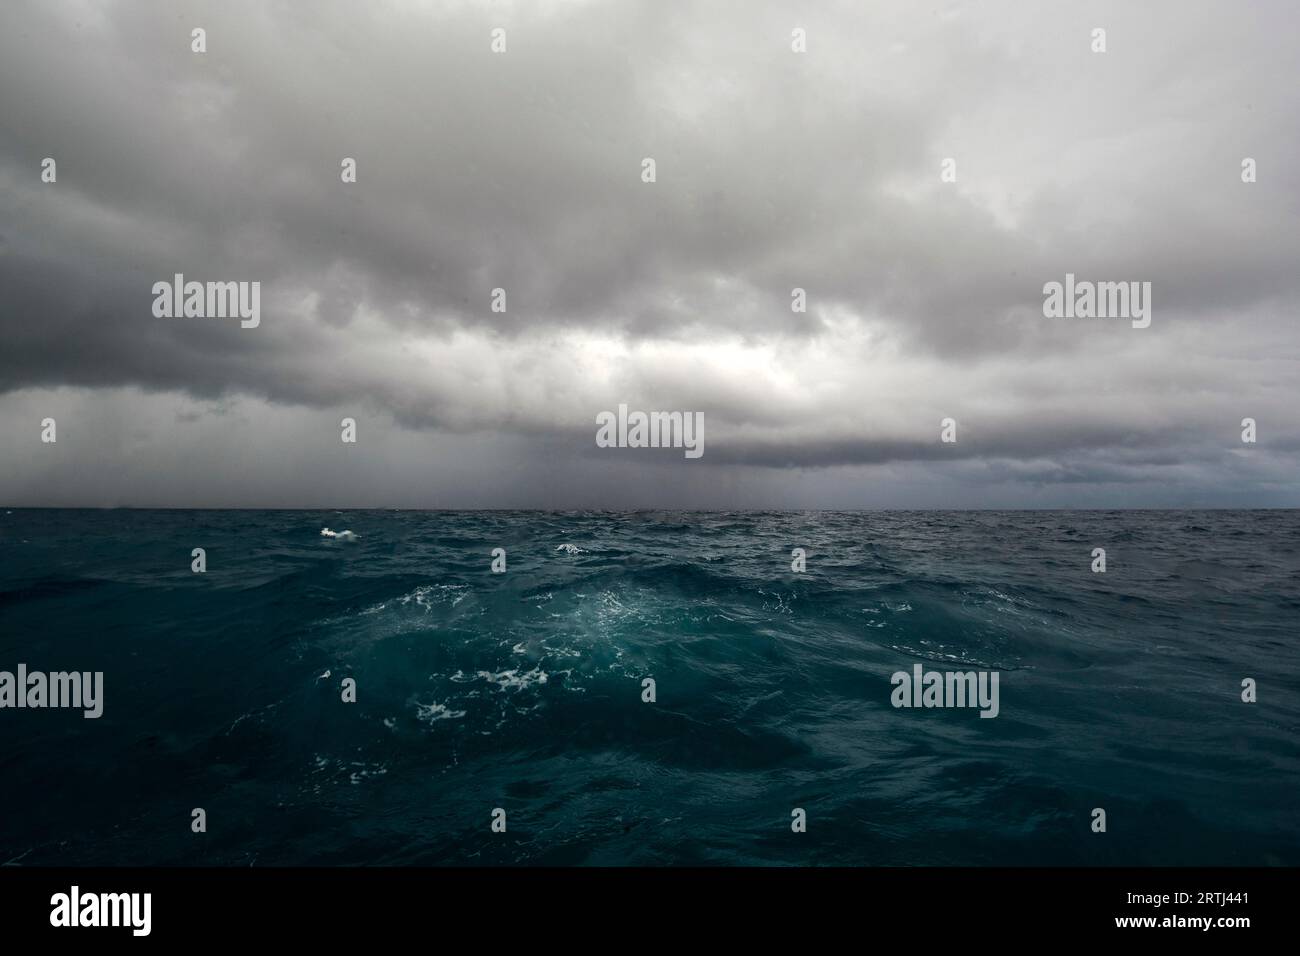 Tropical storm Growing typhoon due to climate change Storm with dark clouds over agitated sea, Pacific Ocean Stock Photo